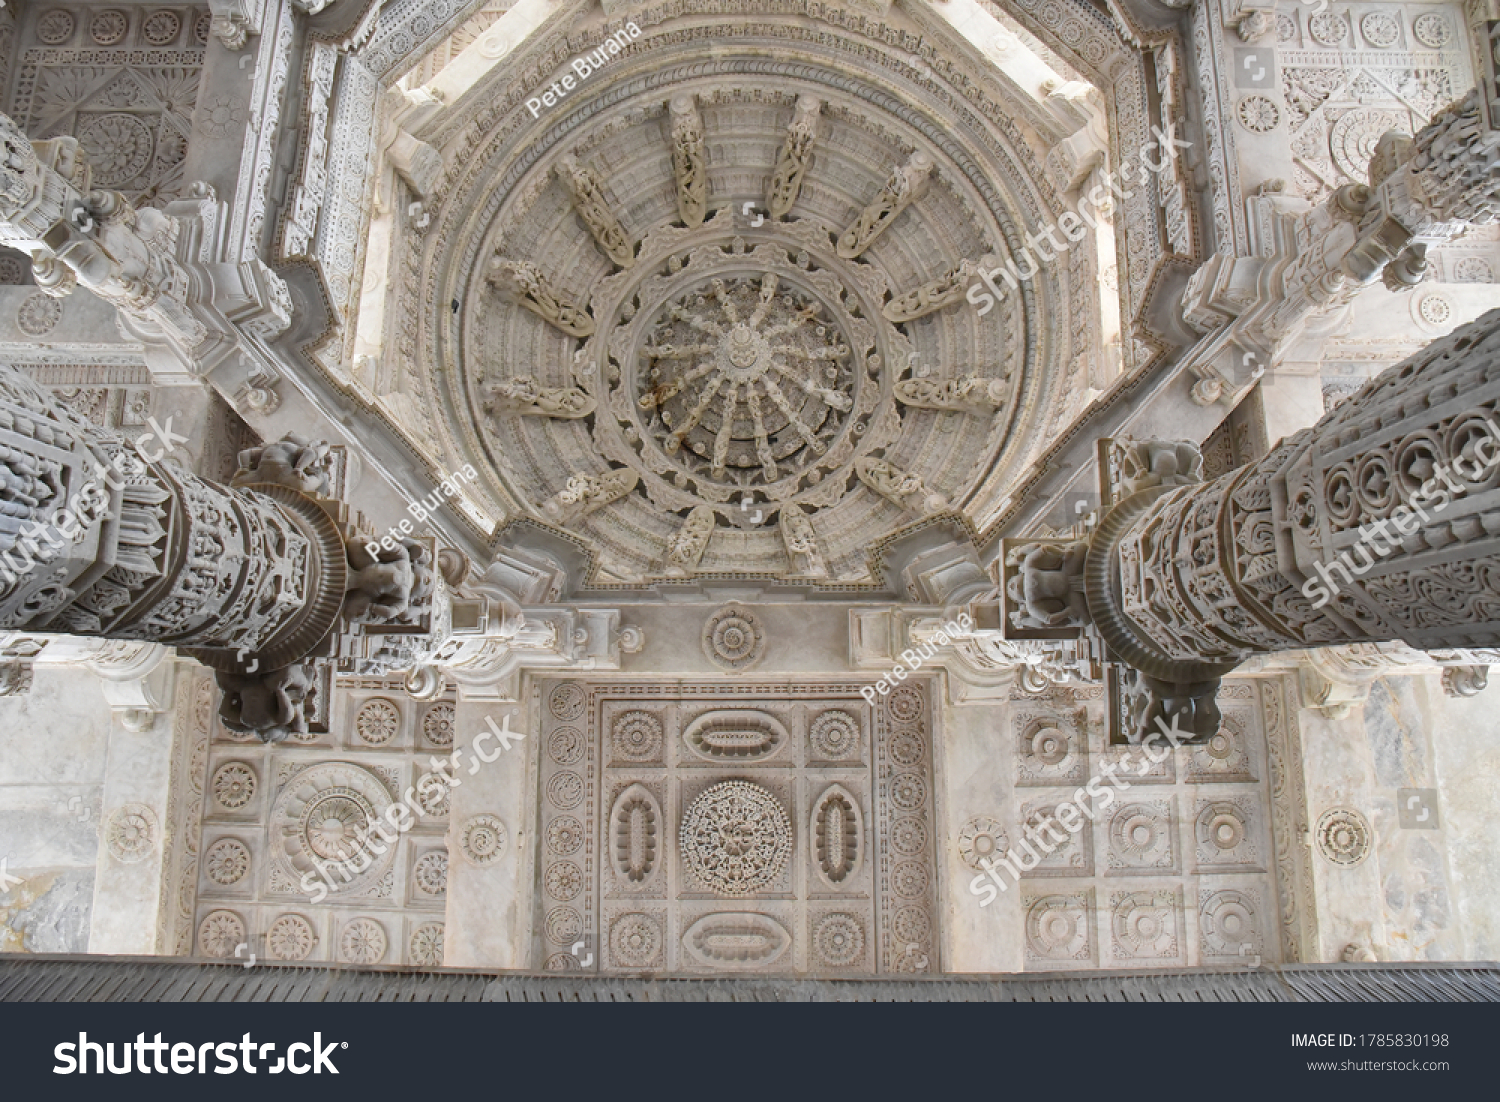 White pink marble stone carvings of ceiling of Jain temple mandir depicting religious murals in Ranakpur Chaumukha temple, Rajasthan, India #1785830198